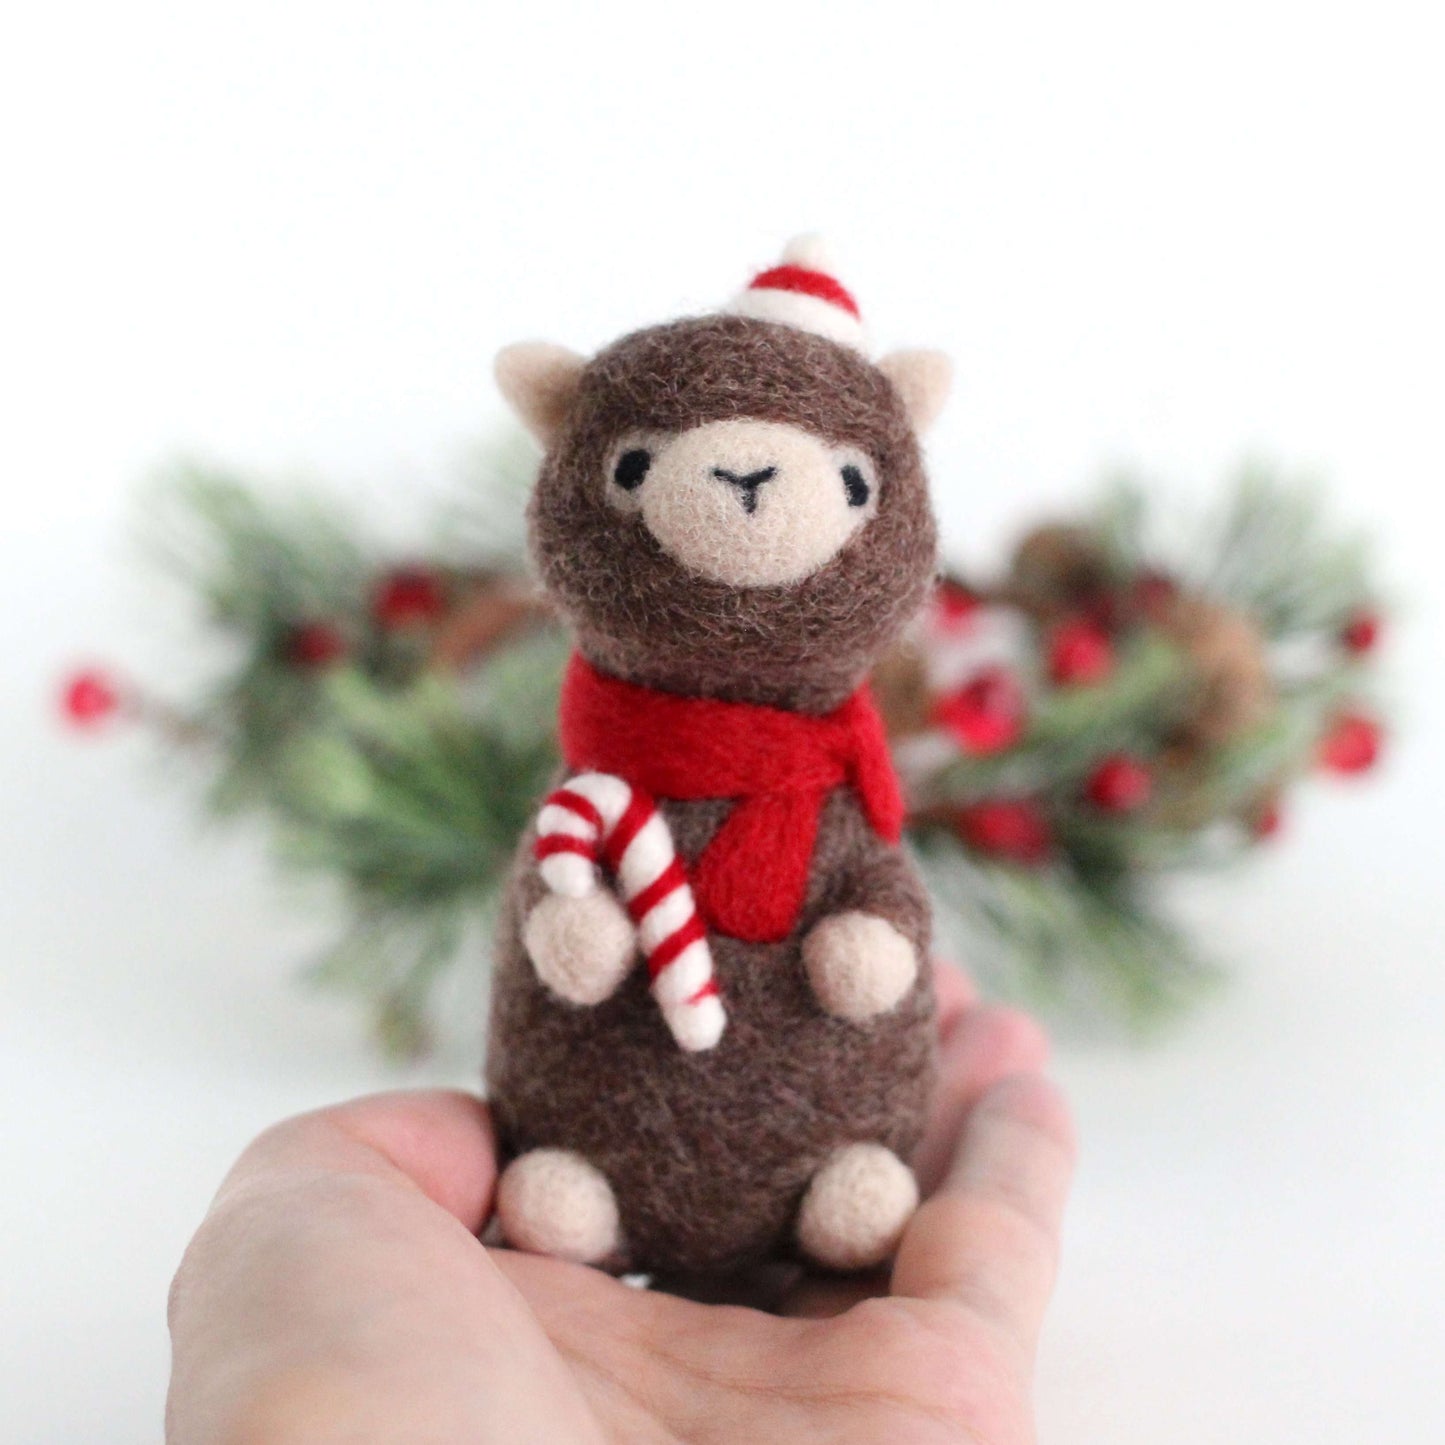 Needle Felted Alpaca holding Candy Cane by Wild Whimsy Woolies